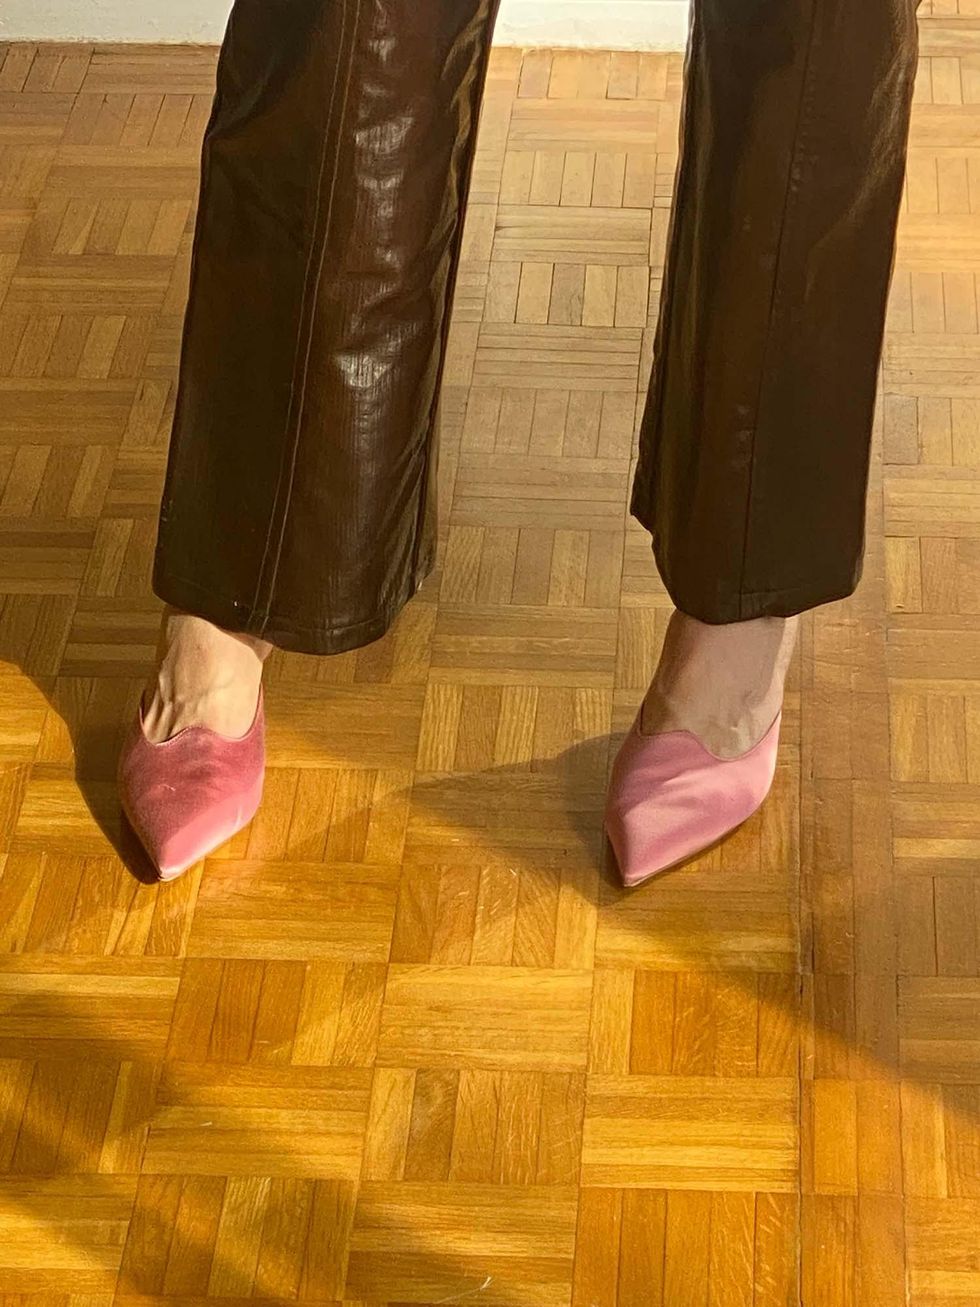 pink mules